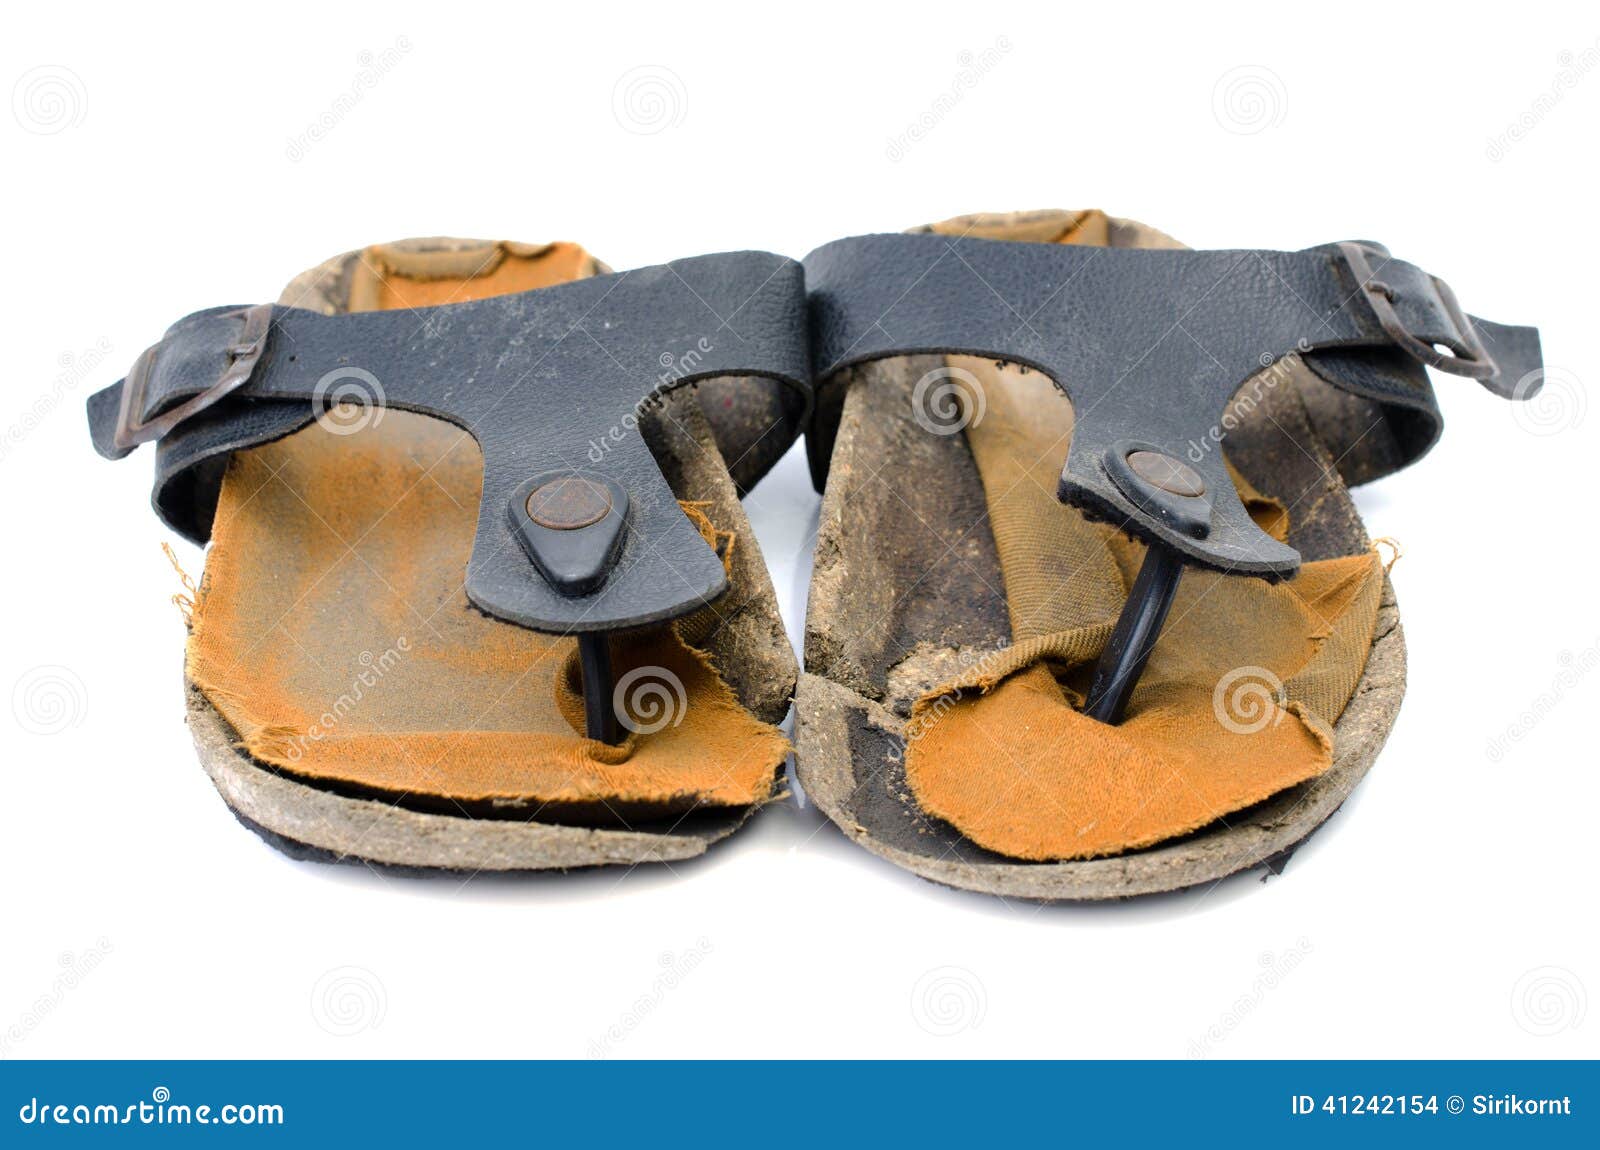 Old Sandals Over White Stock Photo - Image: 41242154